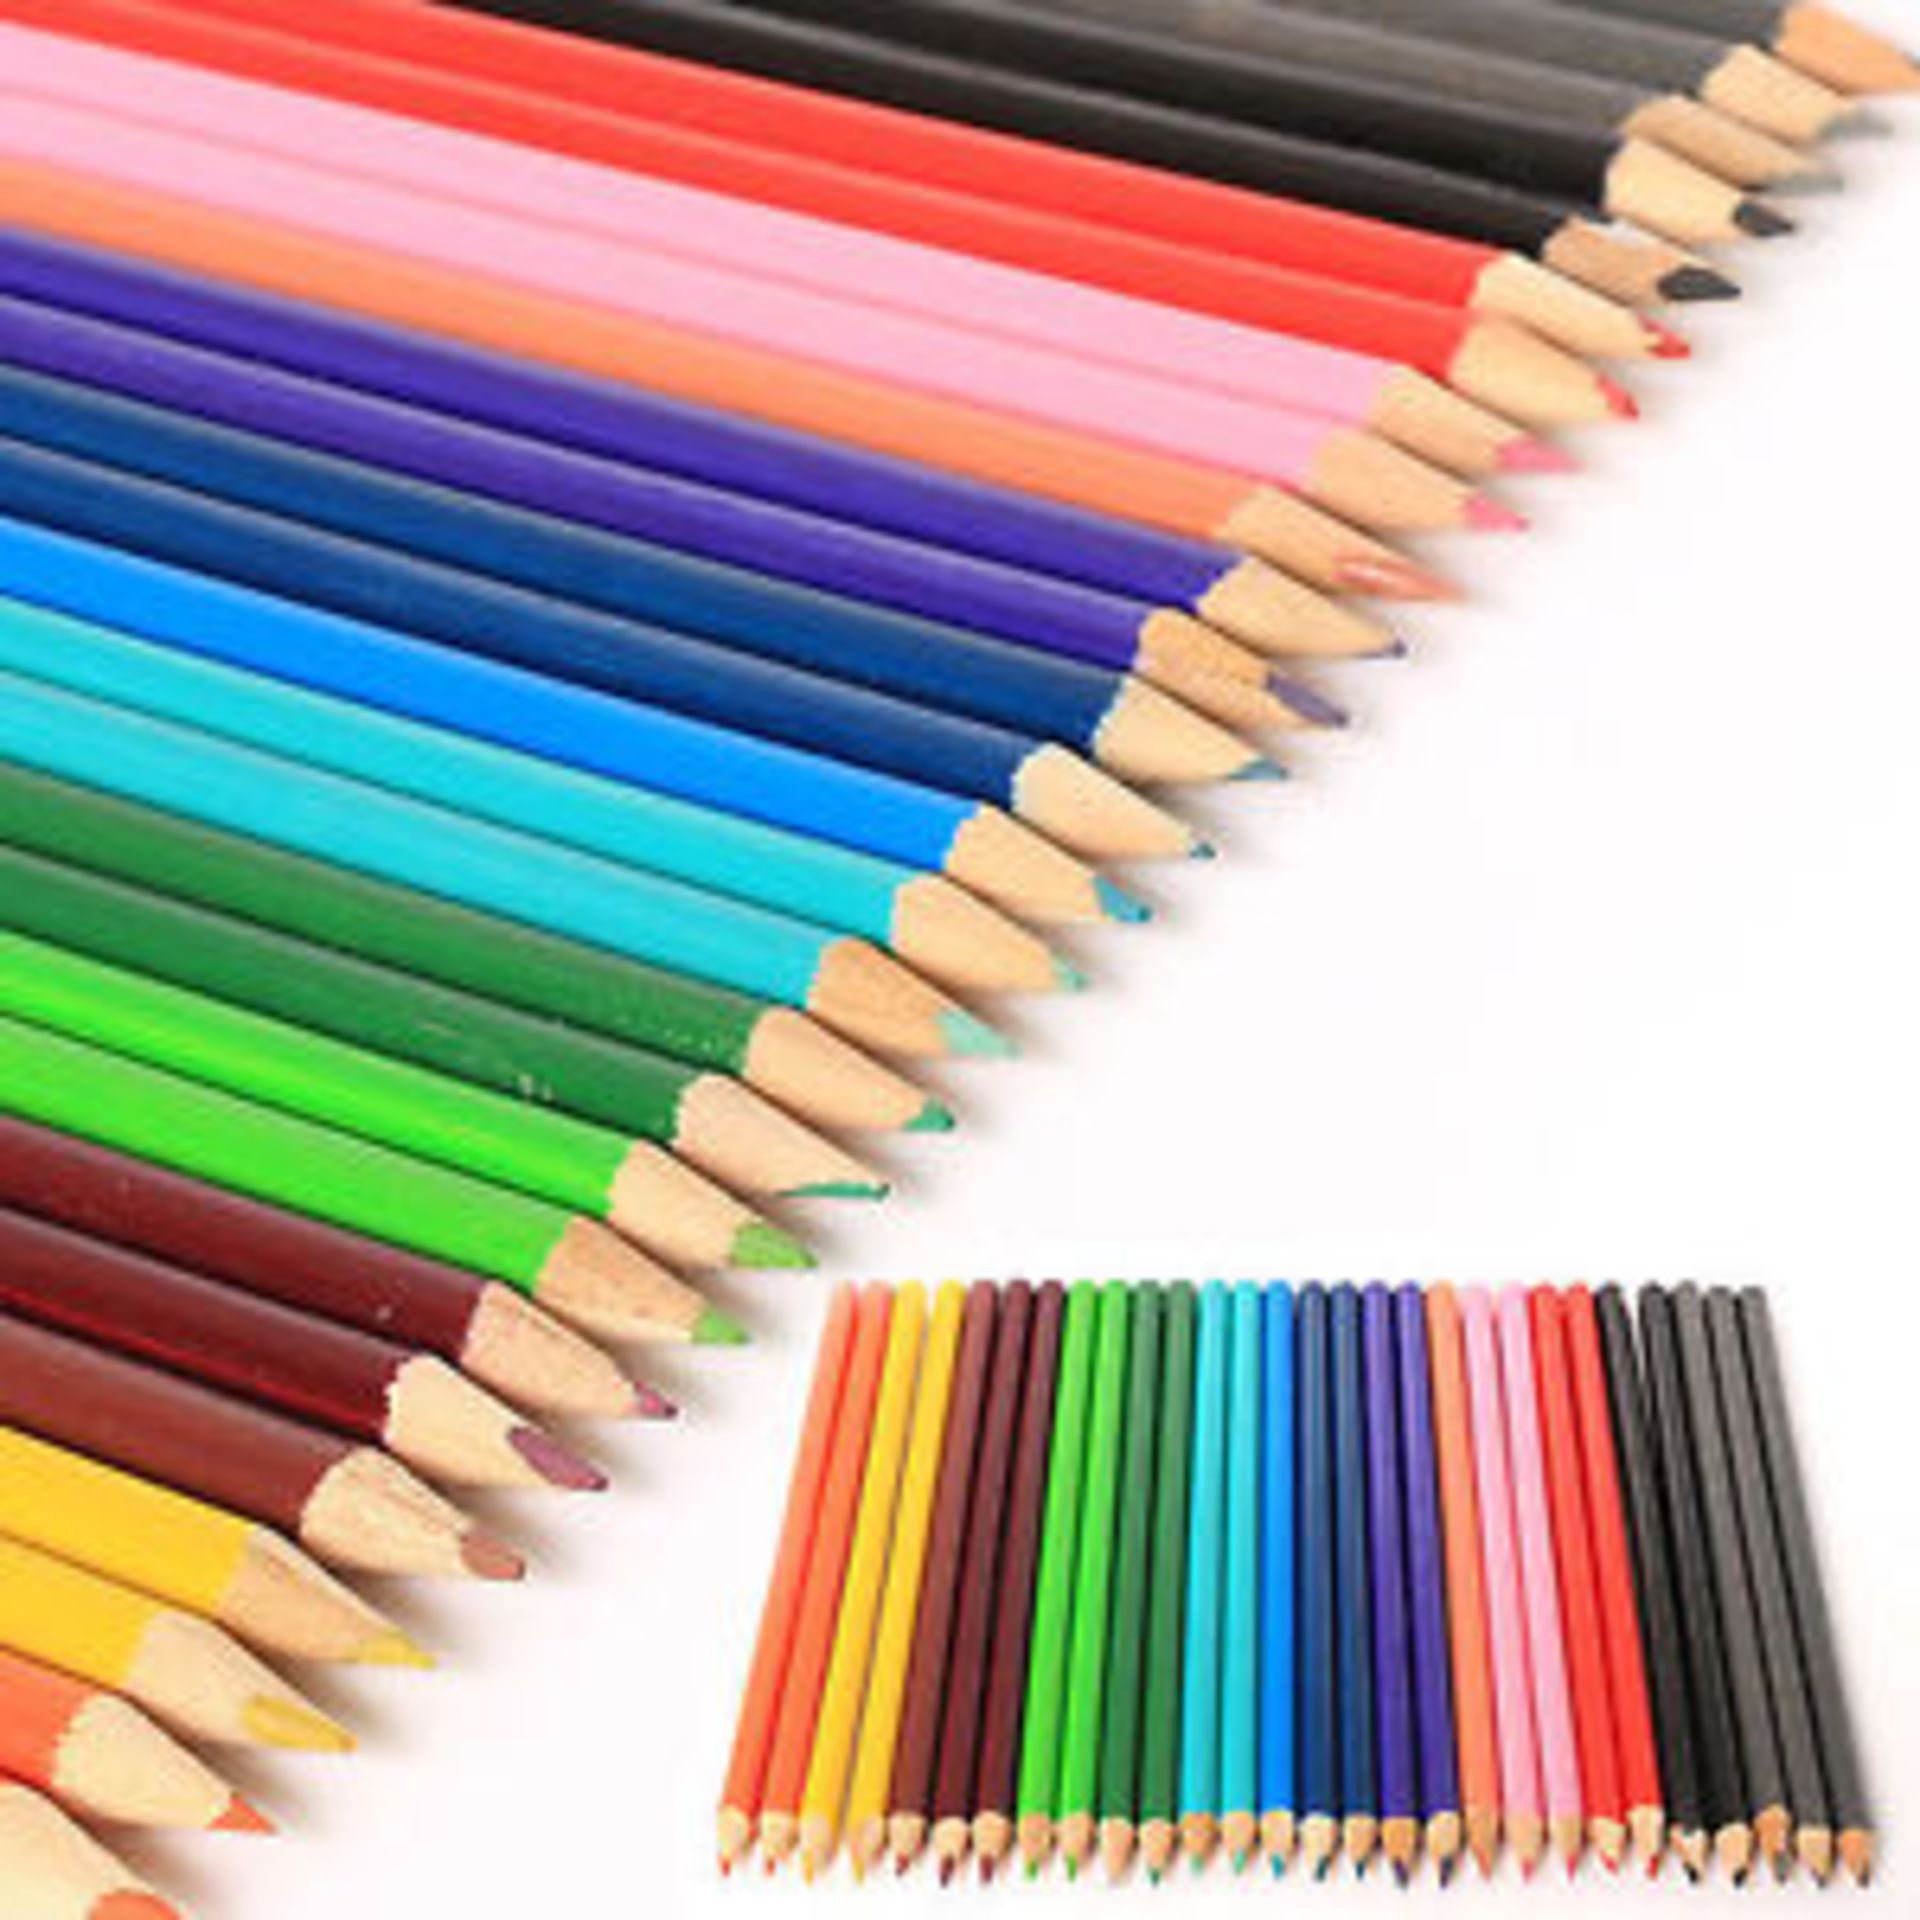 V *TRADE QTY* Brand New 30 Pack Professional Colouring Pencils - Artist Quality X 3 YOUR BID PRICE - Image 2 of 2